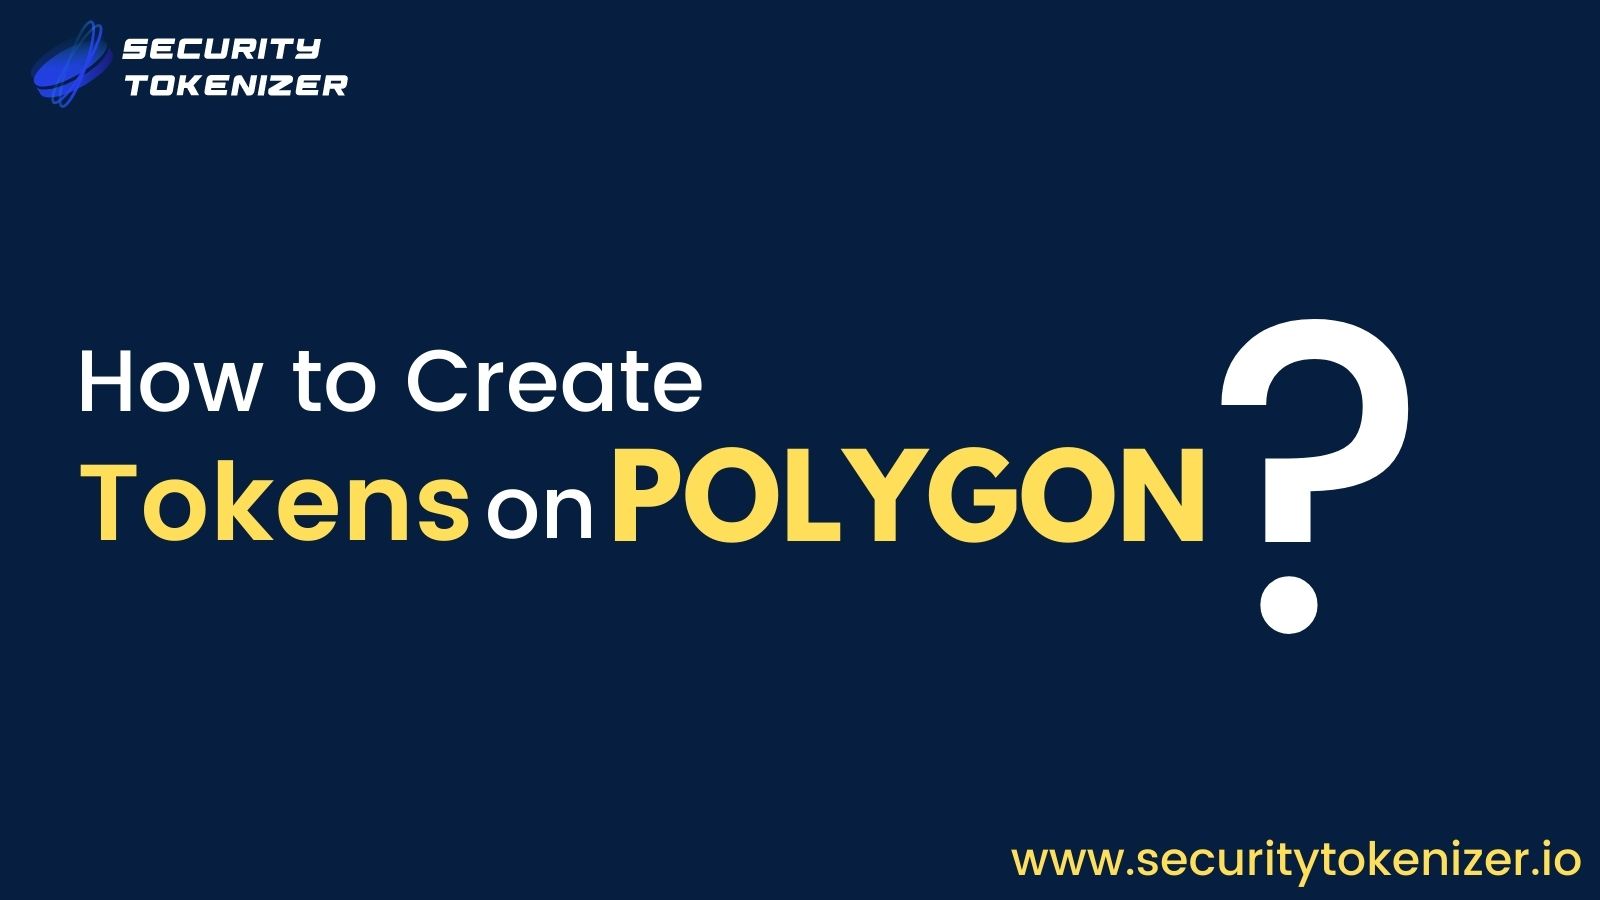 Article about A Guide on How to Create Token on Polygon